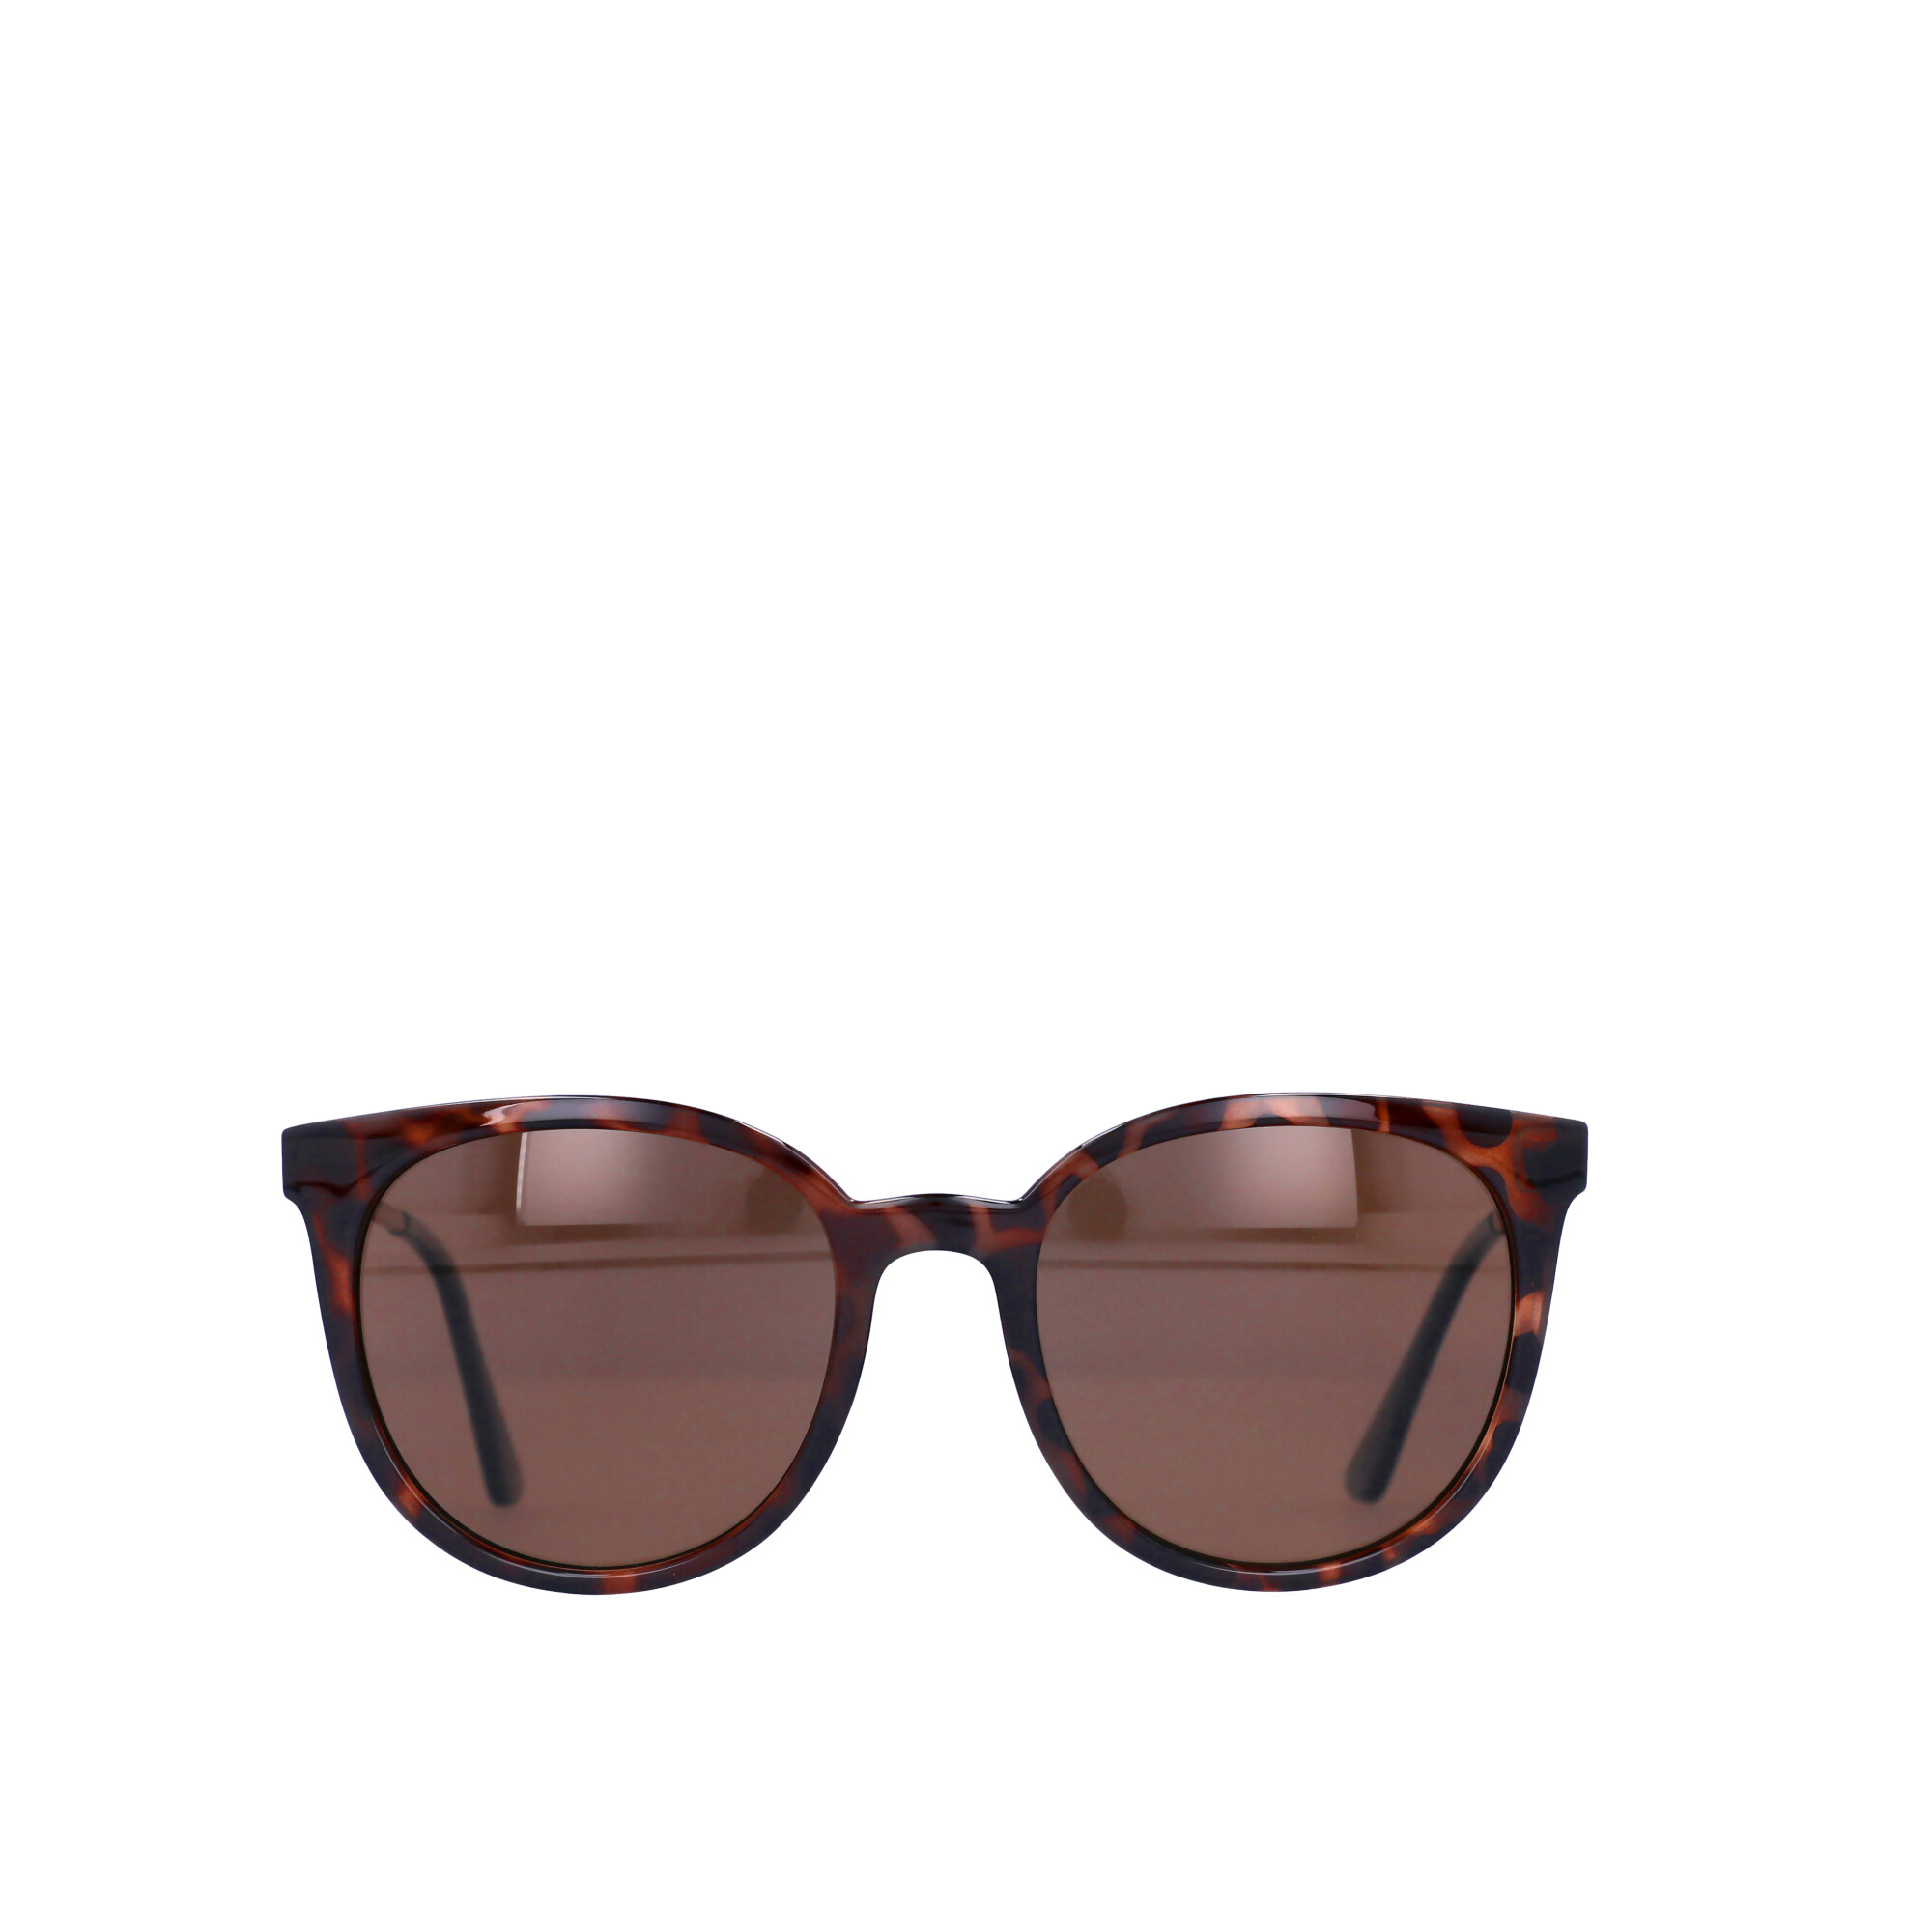 Hard Candy Womens Rx'able Sunglasses, Hs15, Dark Tortoise Patterned, 54-20-143, with Case - image 5 of 13